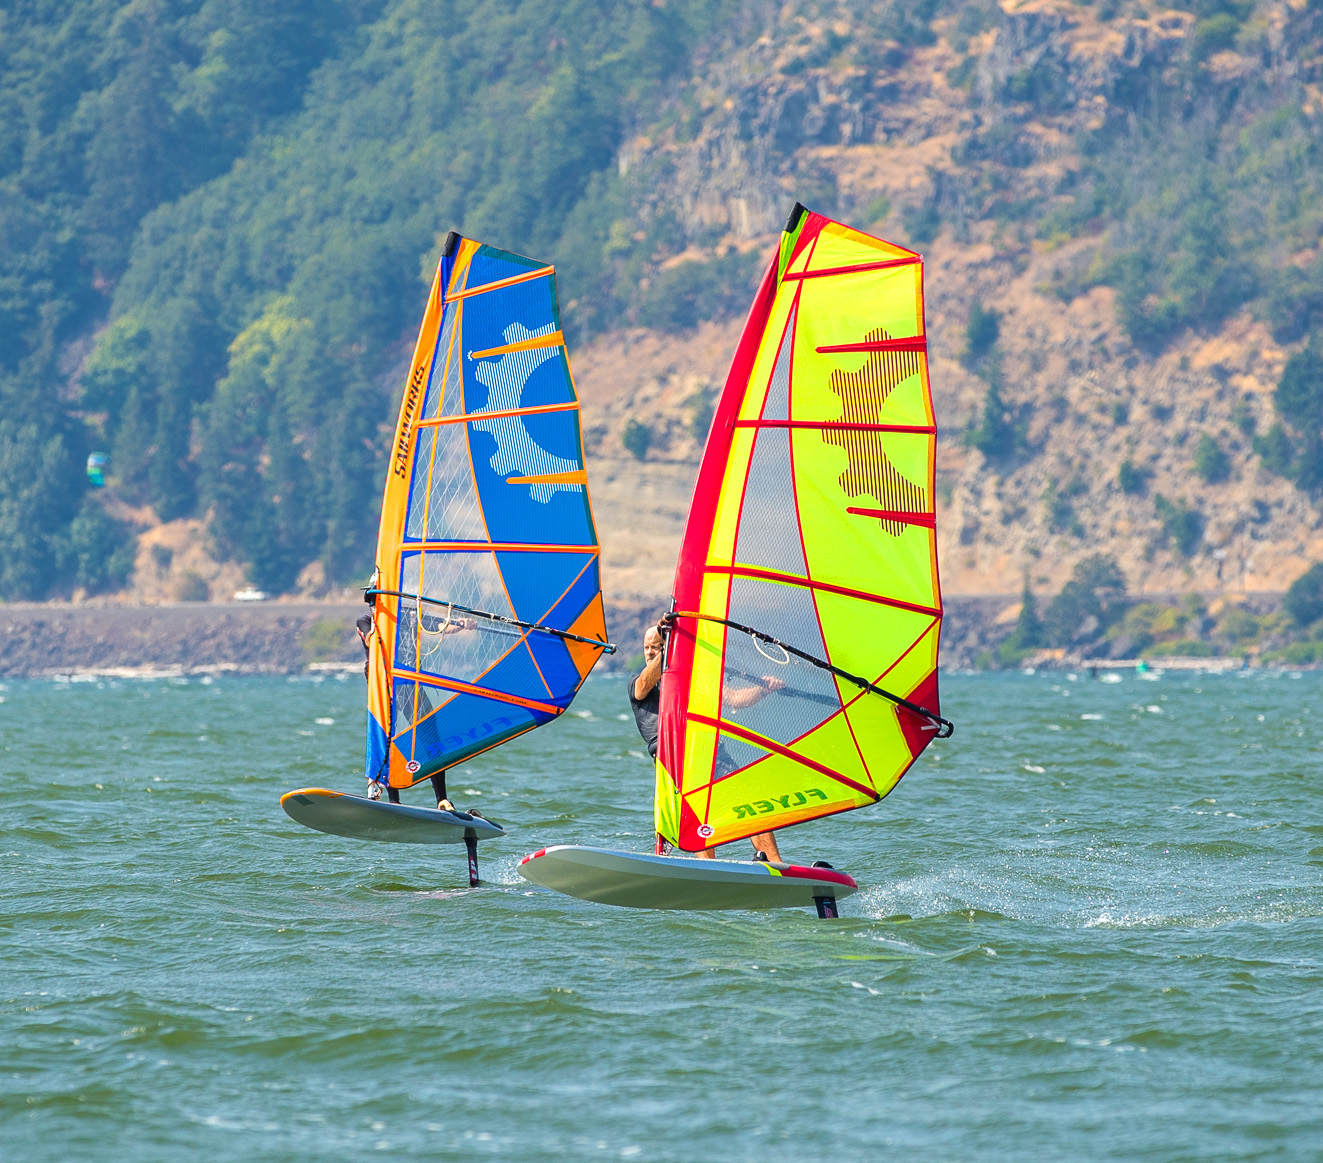 Jim Mudry Windfoiling Tips